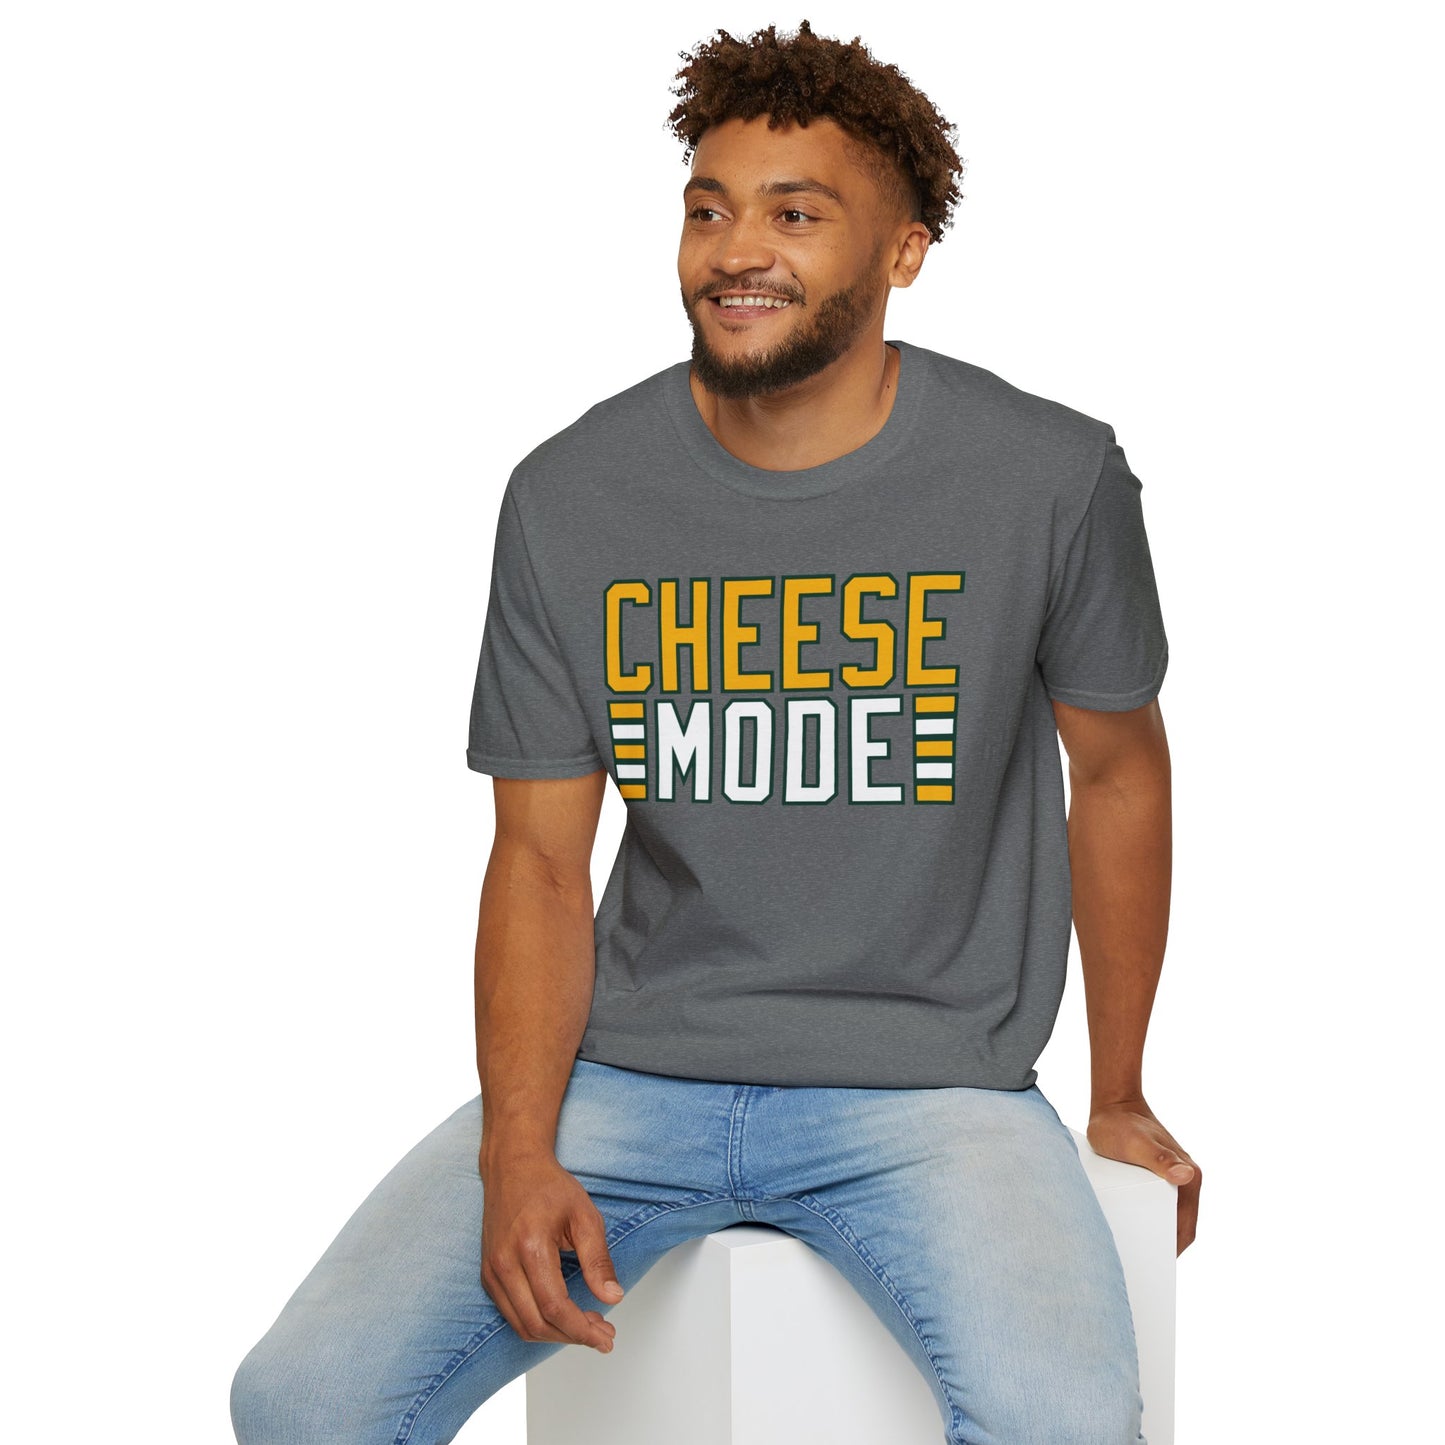 Cheese Mode Packers T-Shirt - Ultra-Soft Cotton Blend, Unisex Classic Fit